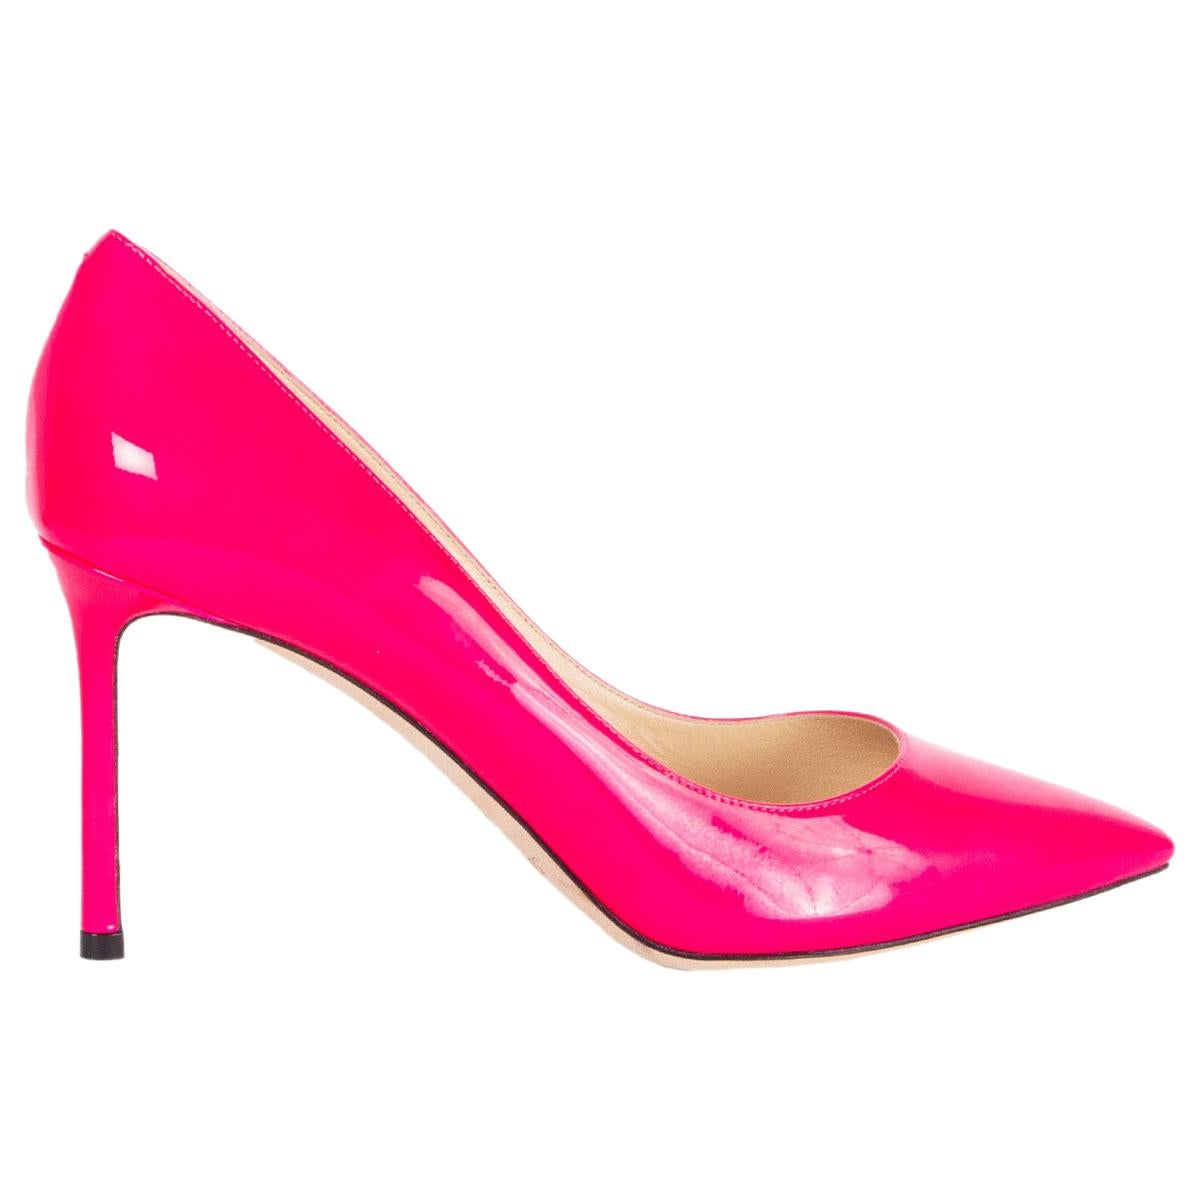 JIMMY CHOO hot pink patent leather ROMY 85 POINTED-TOE Pumps Shoes 39.5 For Sale